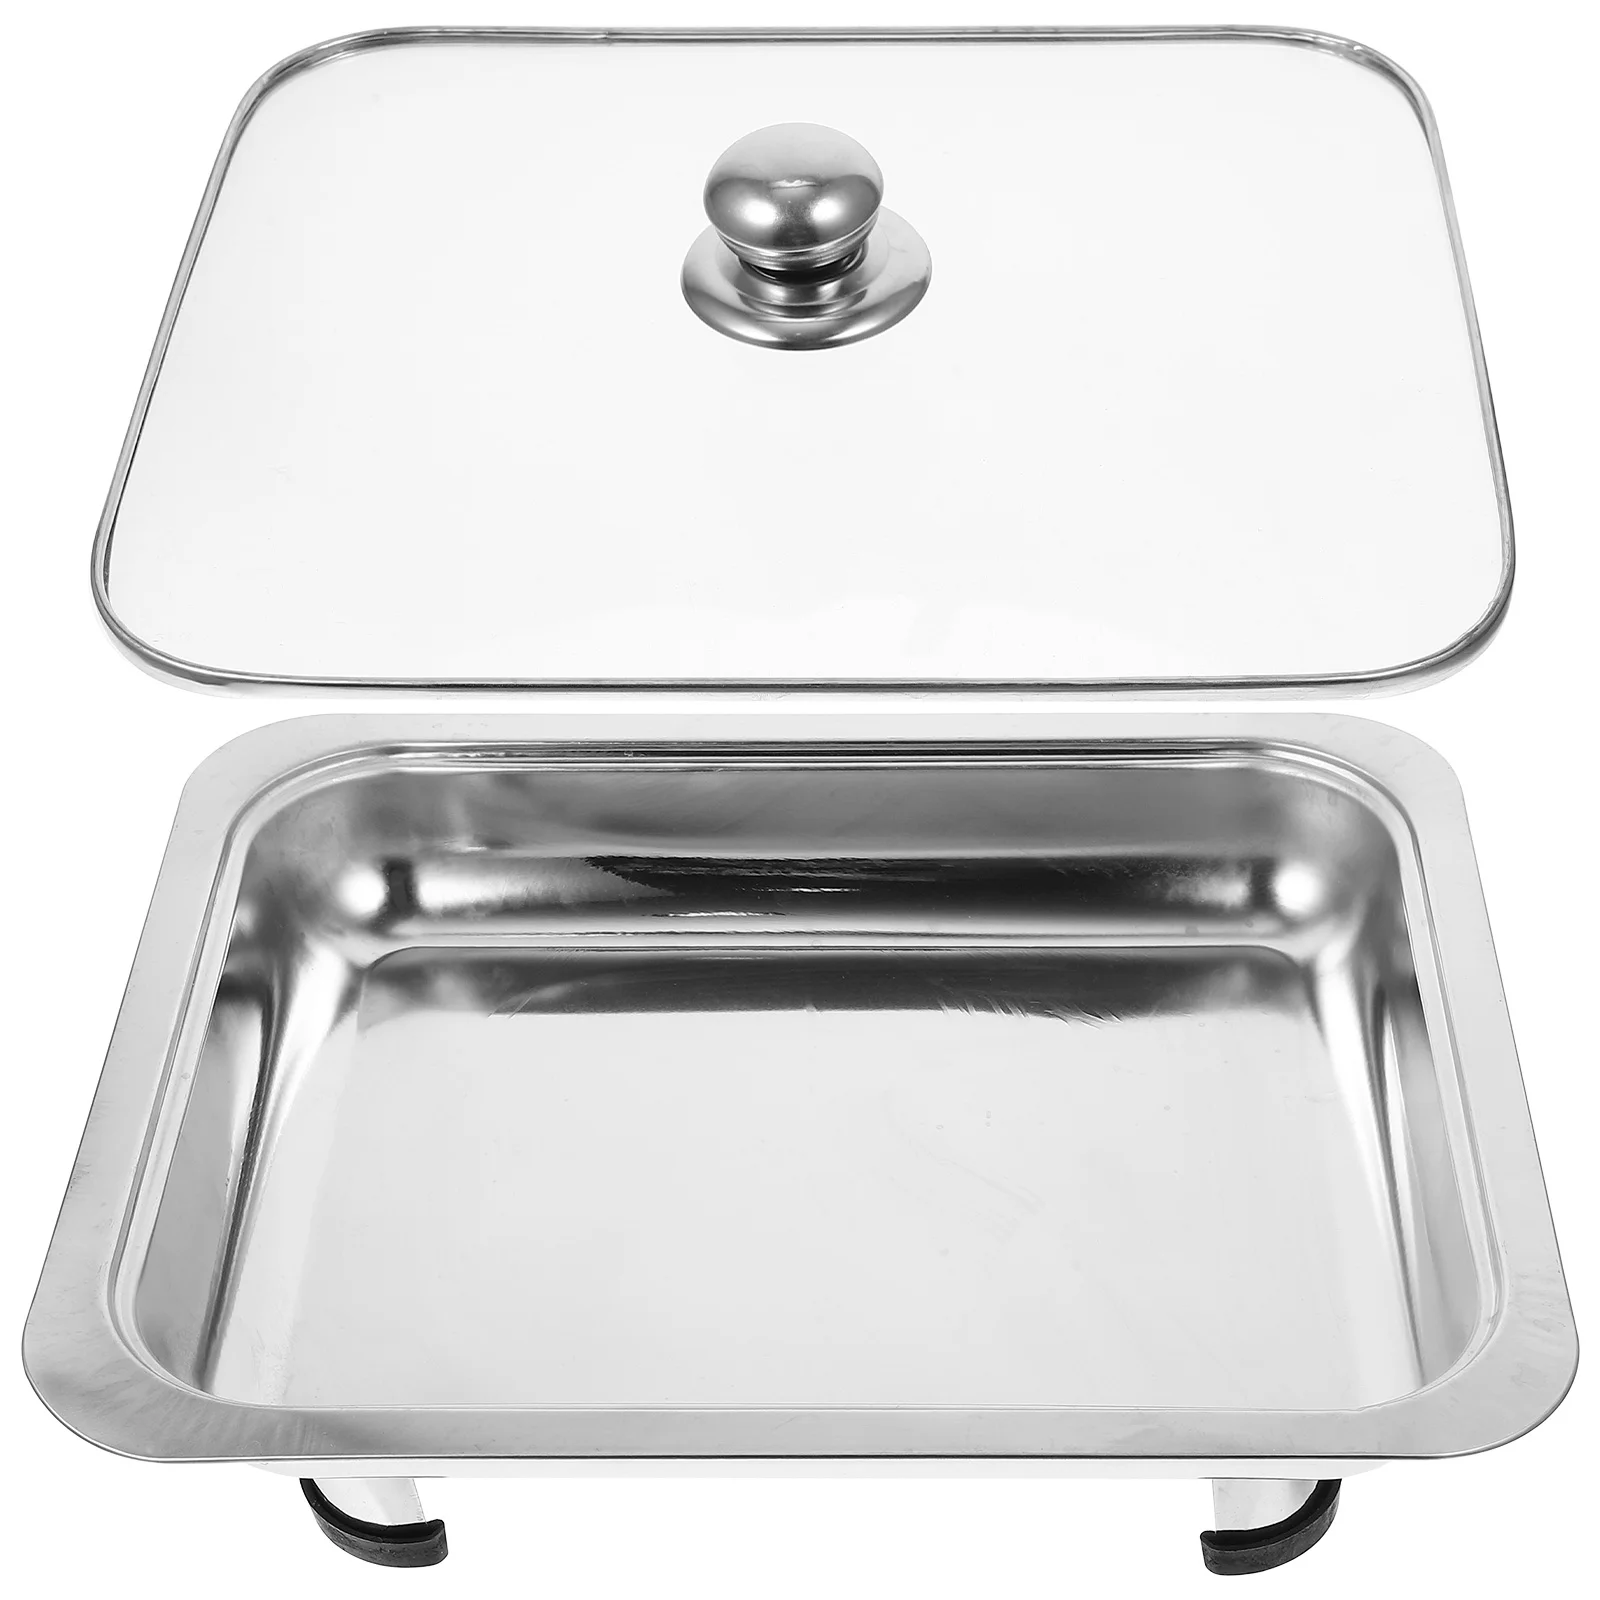 

Steel Buffet Server Dish Flat Bread Tray Stainless-steel Foods Holder Classic Dishes Serving Plate for Banquet with Lid